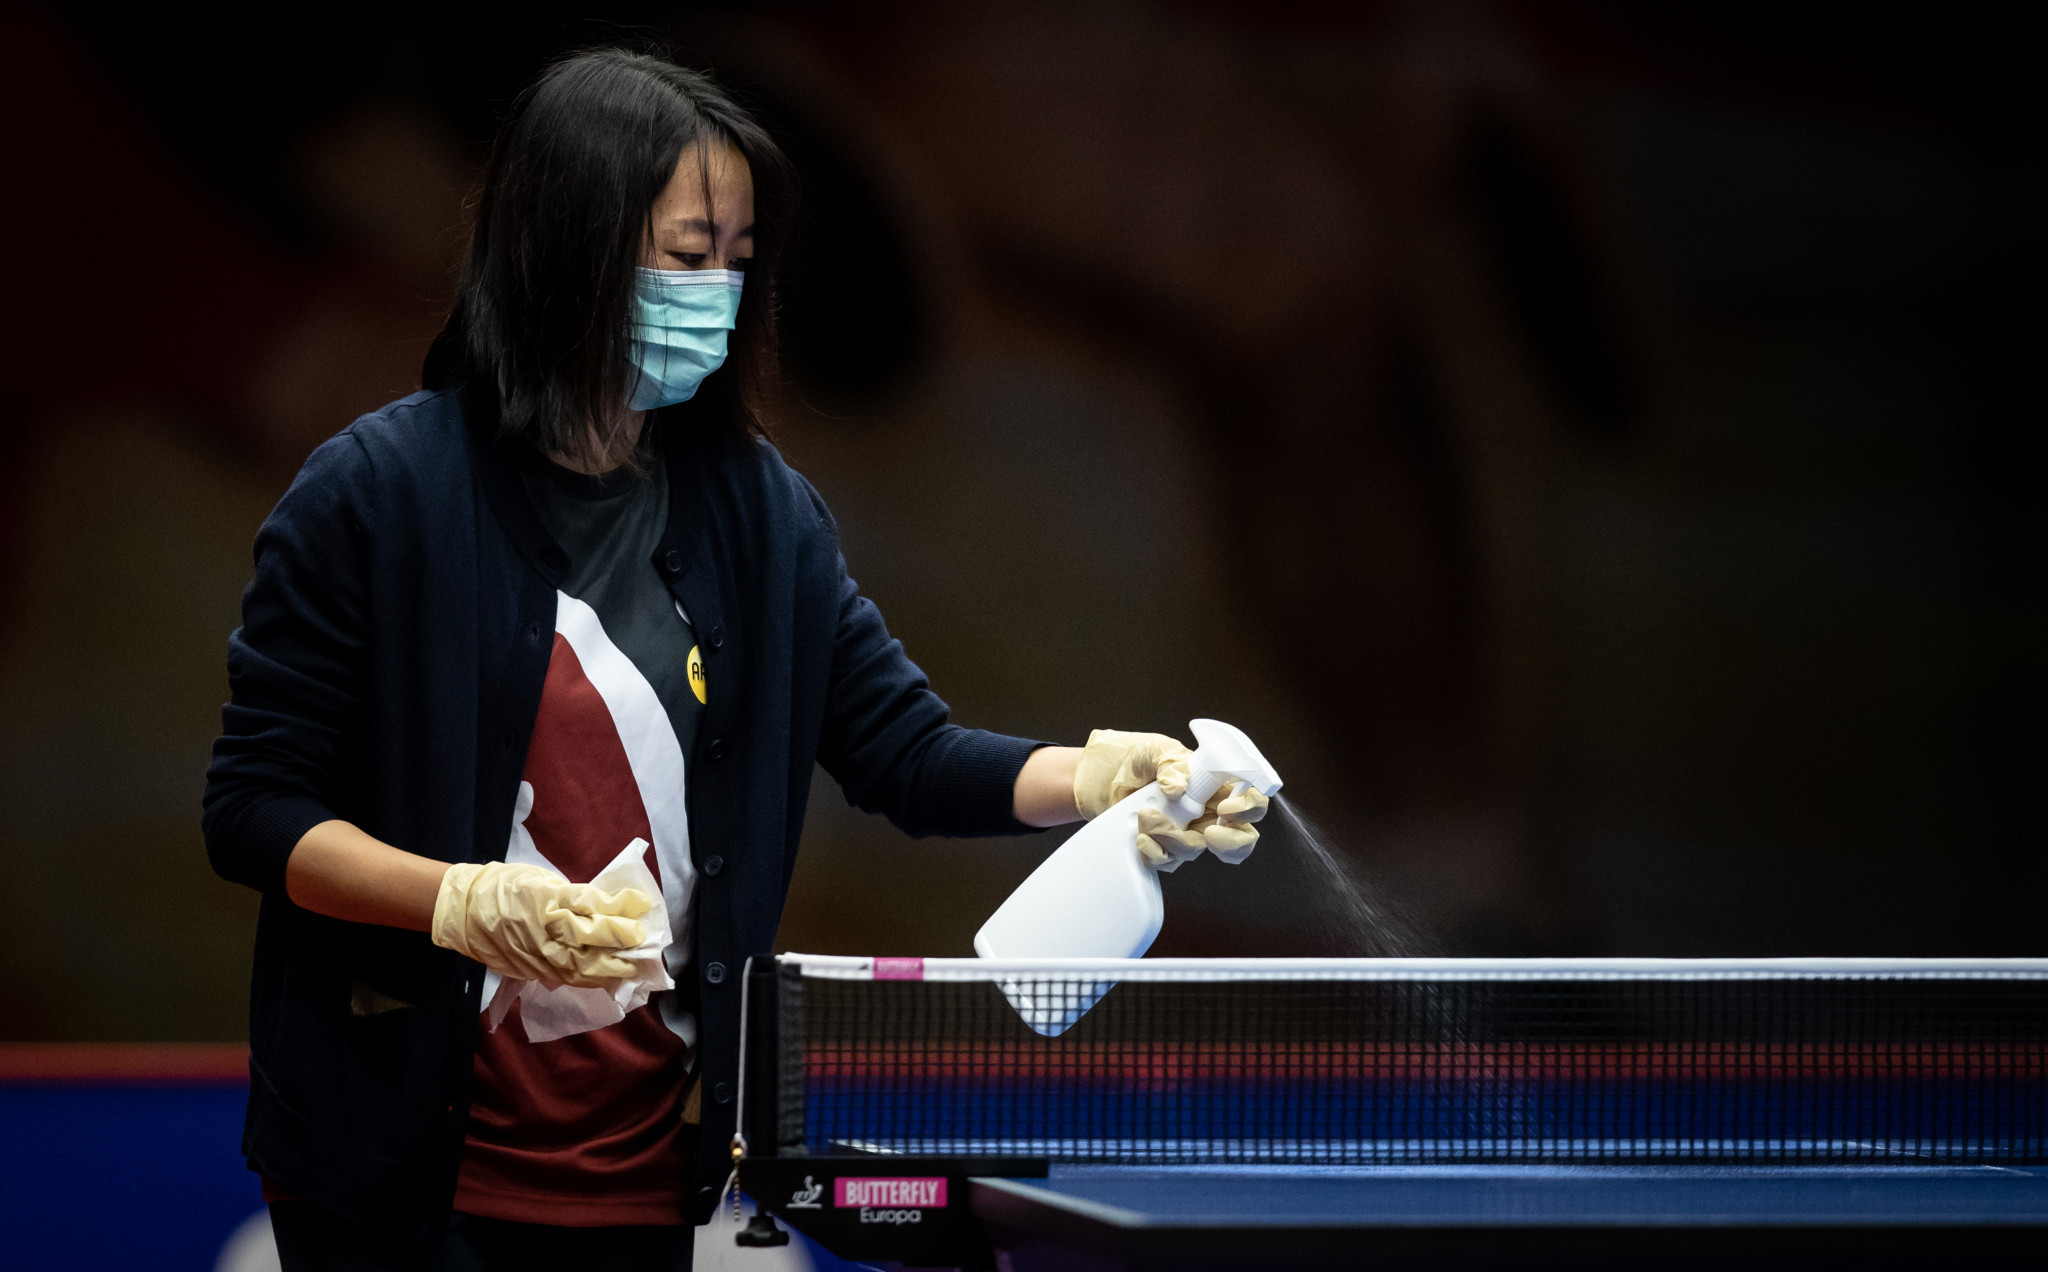 It is expected the ITTF Swedish International Open will take place with strict COVID-19 protocols in place ©Getty Images